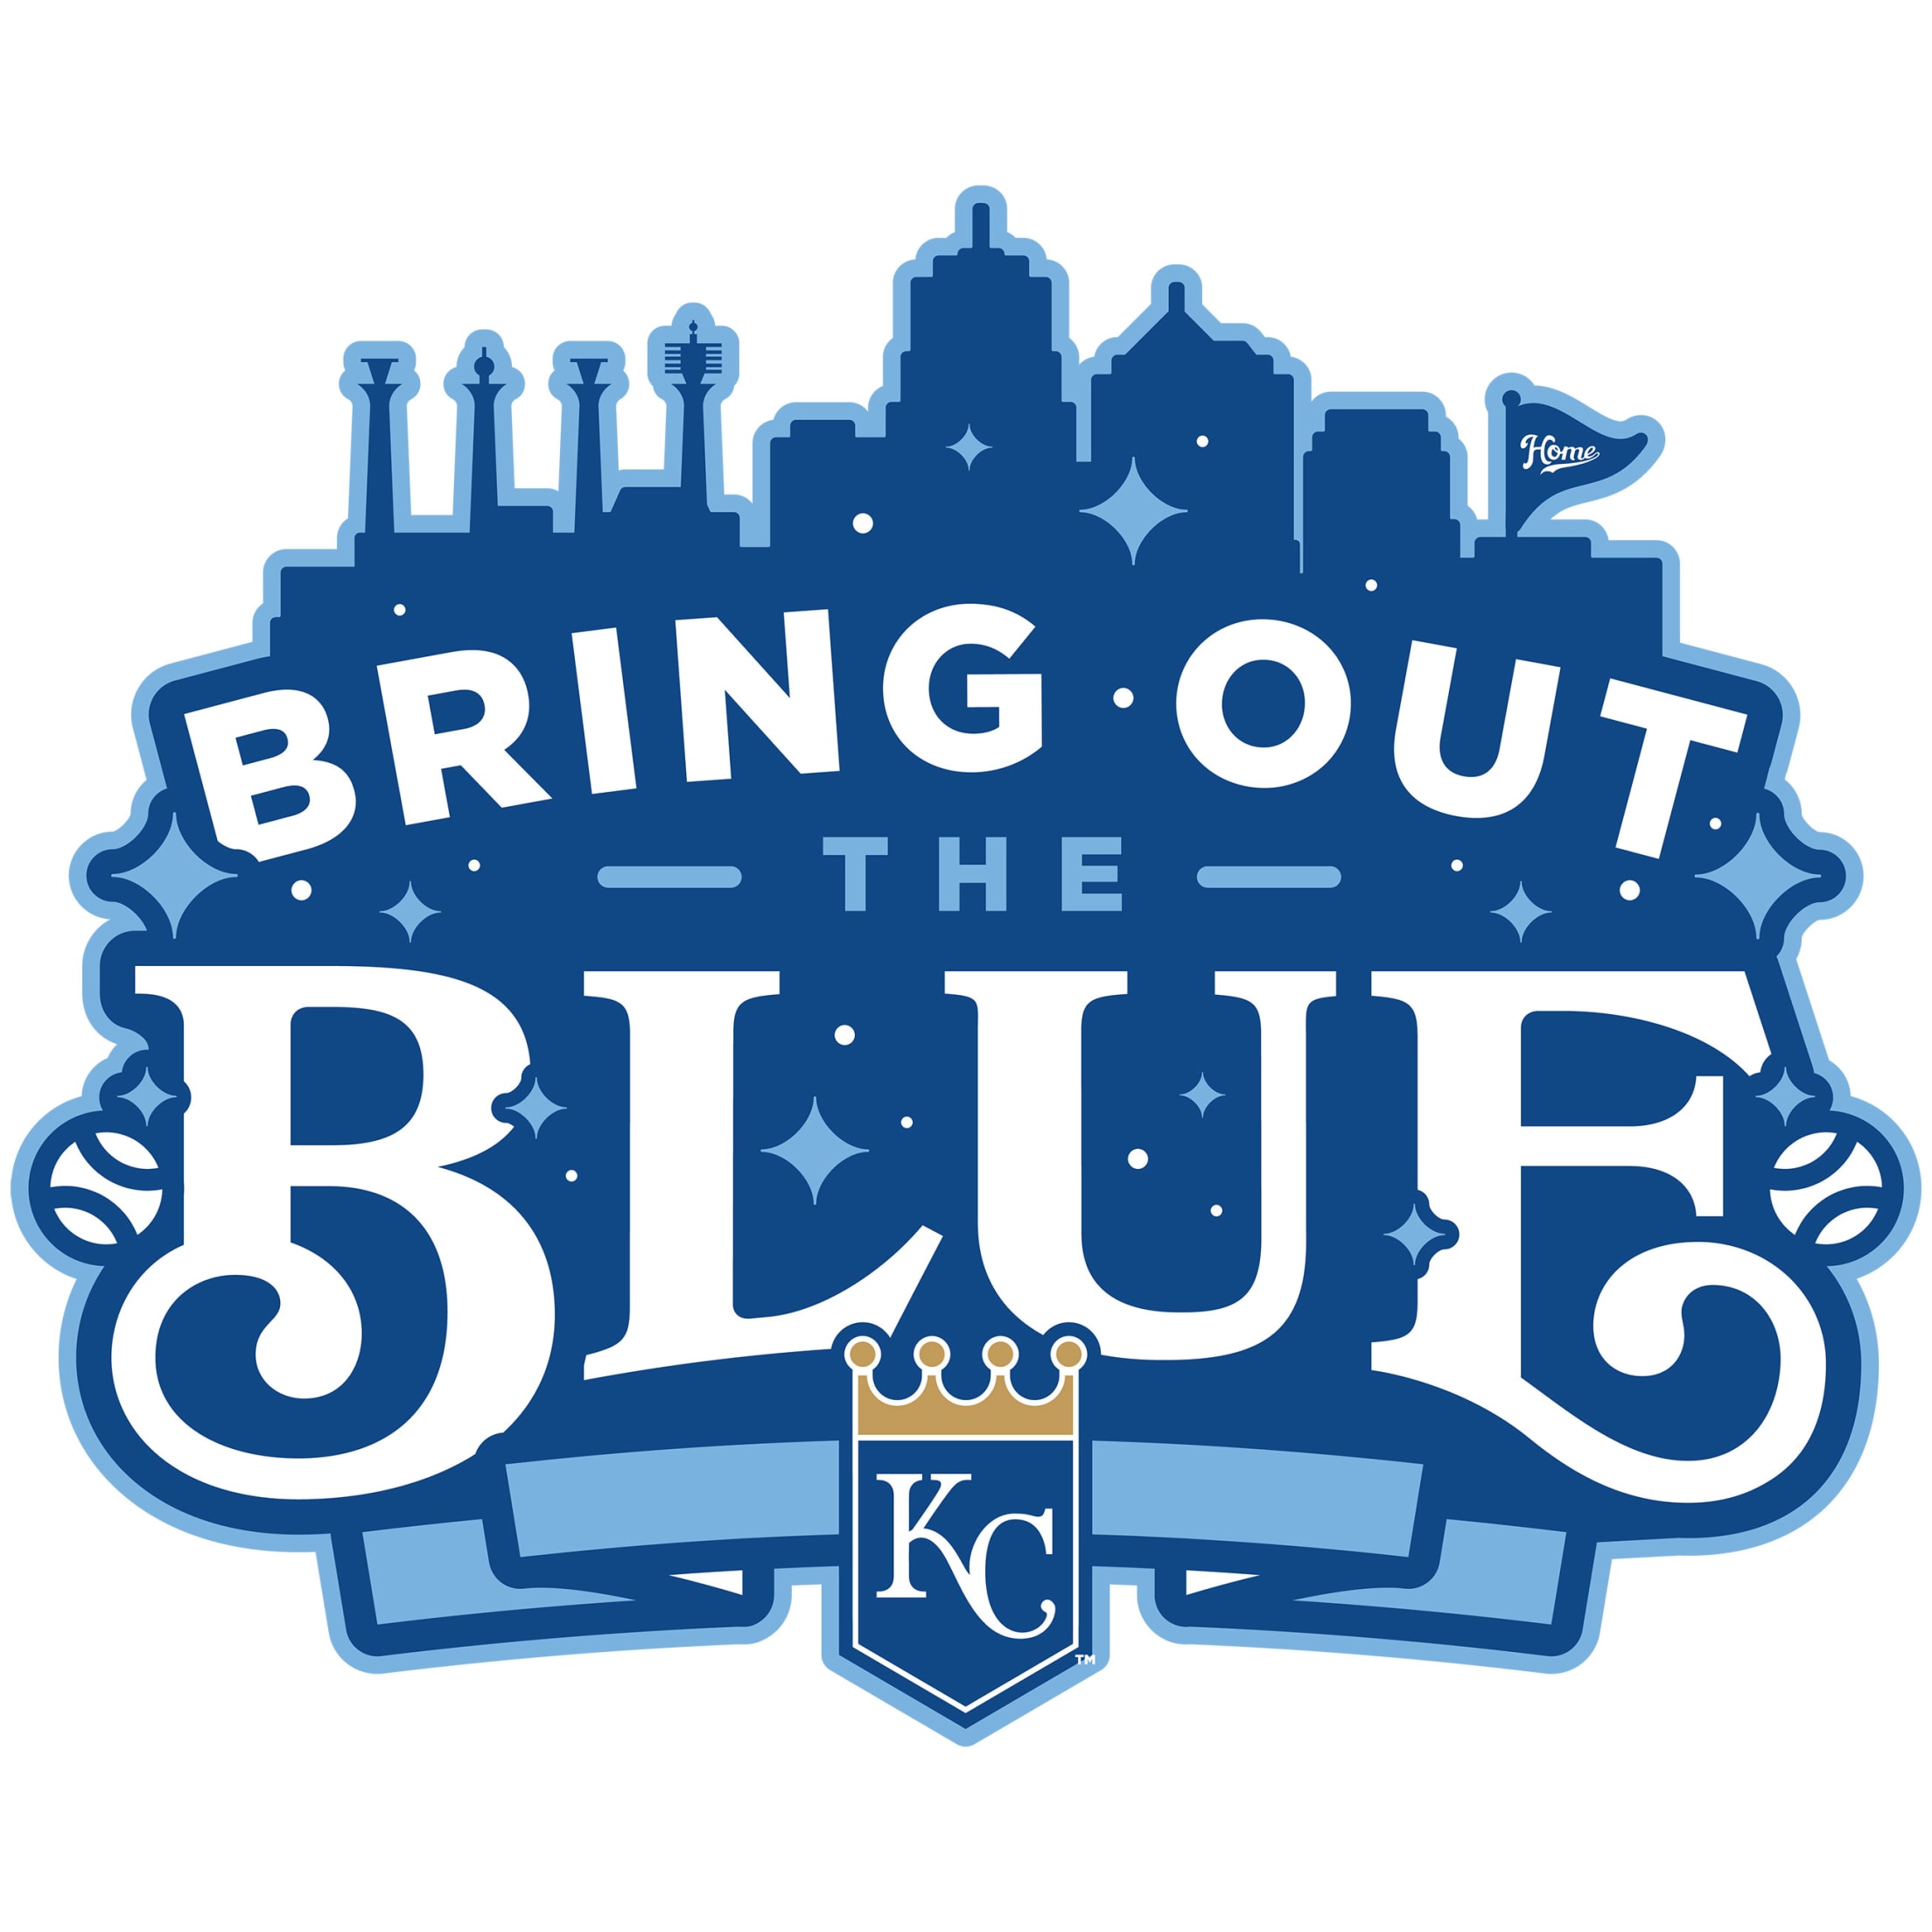 Bring Out The Blue:' Royals announce 2022 slogan